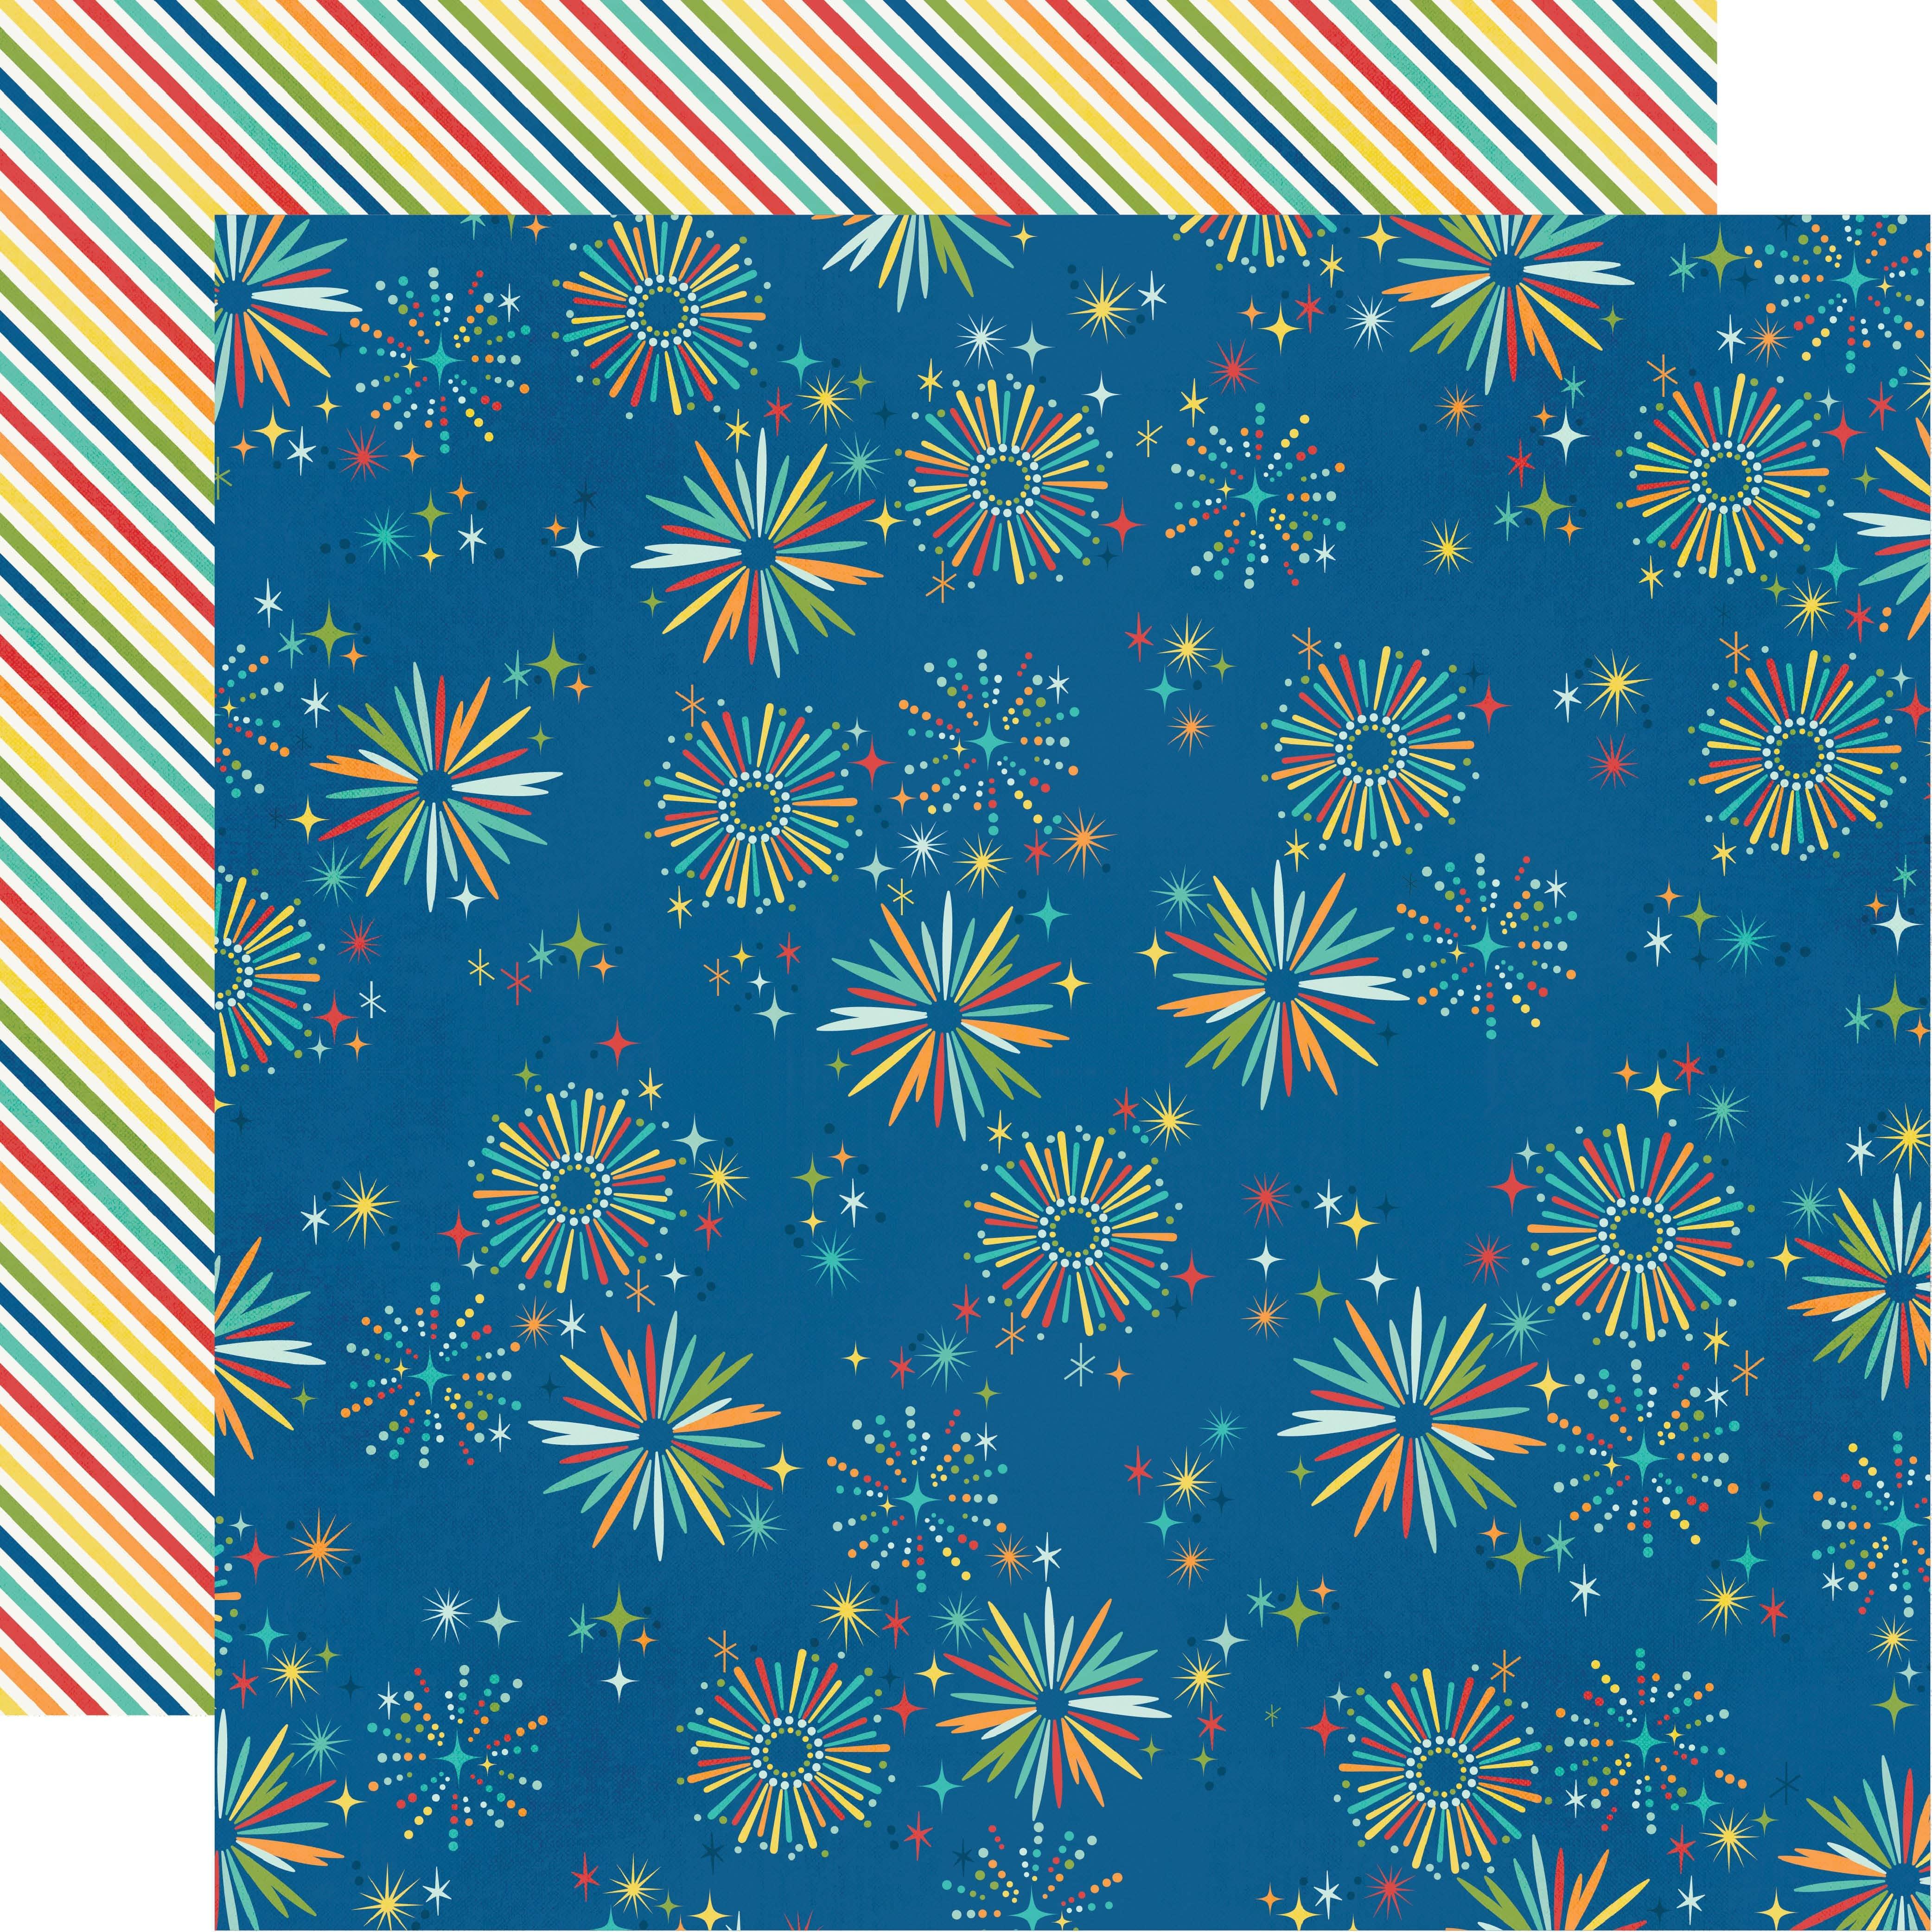 Say Cheese At The Park Collection What A Blast! 12 x 12 Double-Sided Scrapbook Paper by Simple Stories - Scrapbook Supply Companies